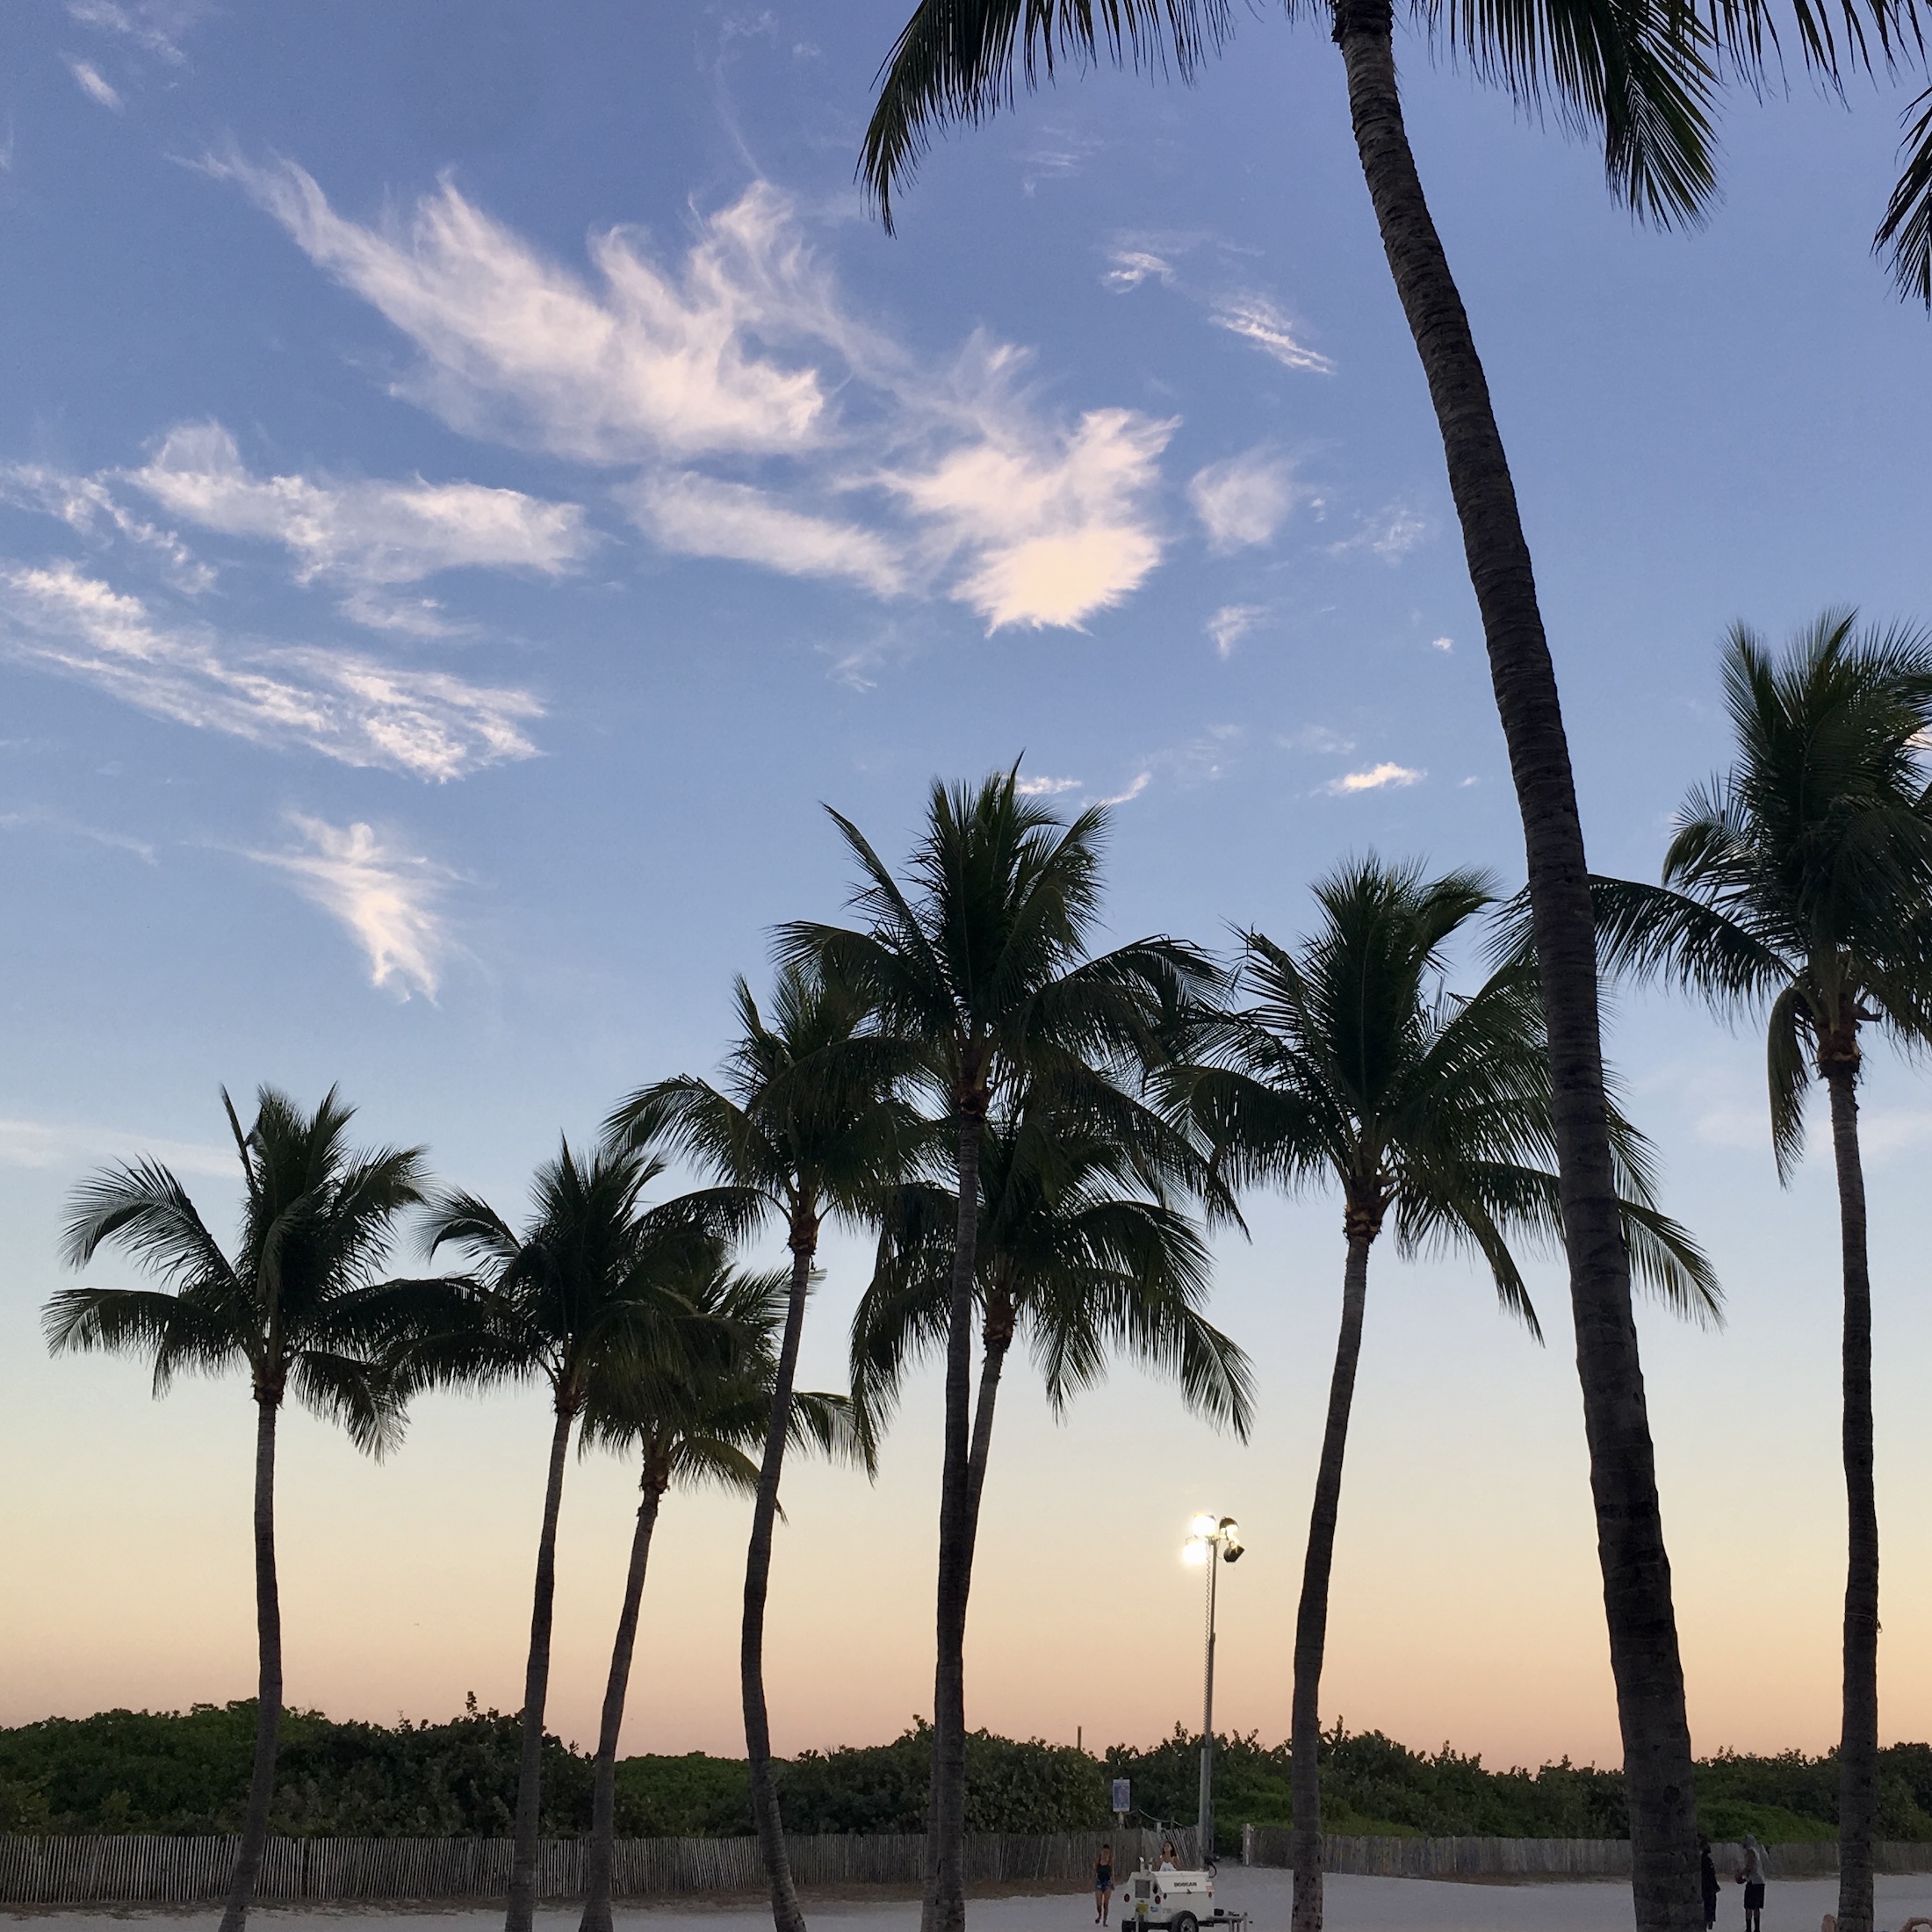 palm trees at sunset in miami beach, florida, usa